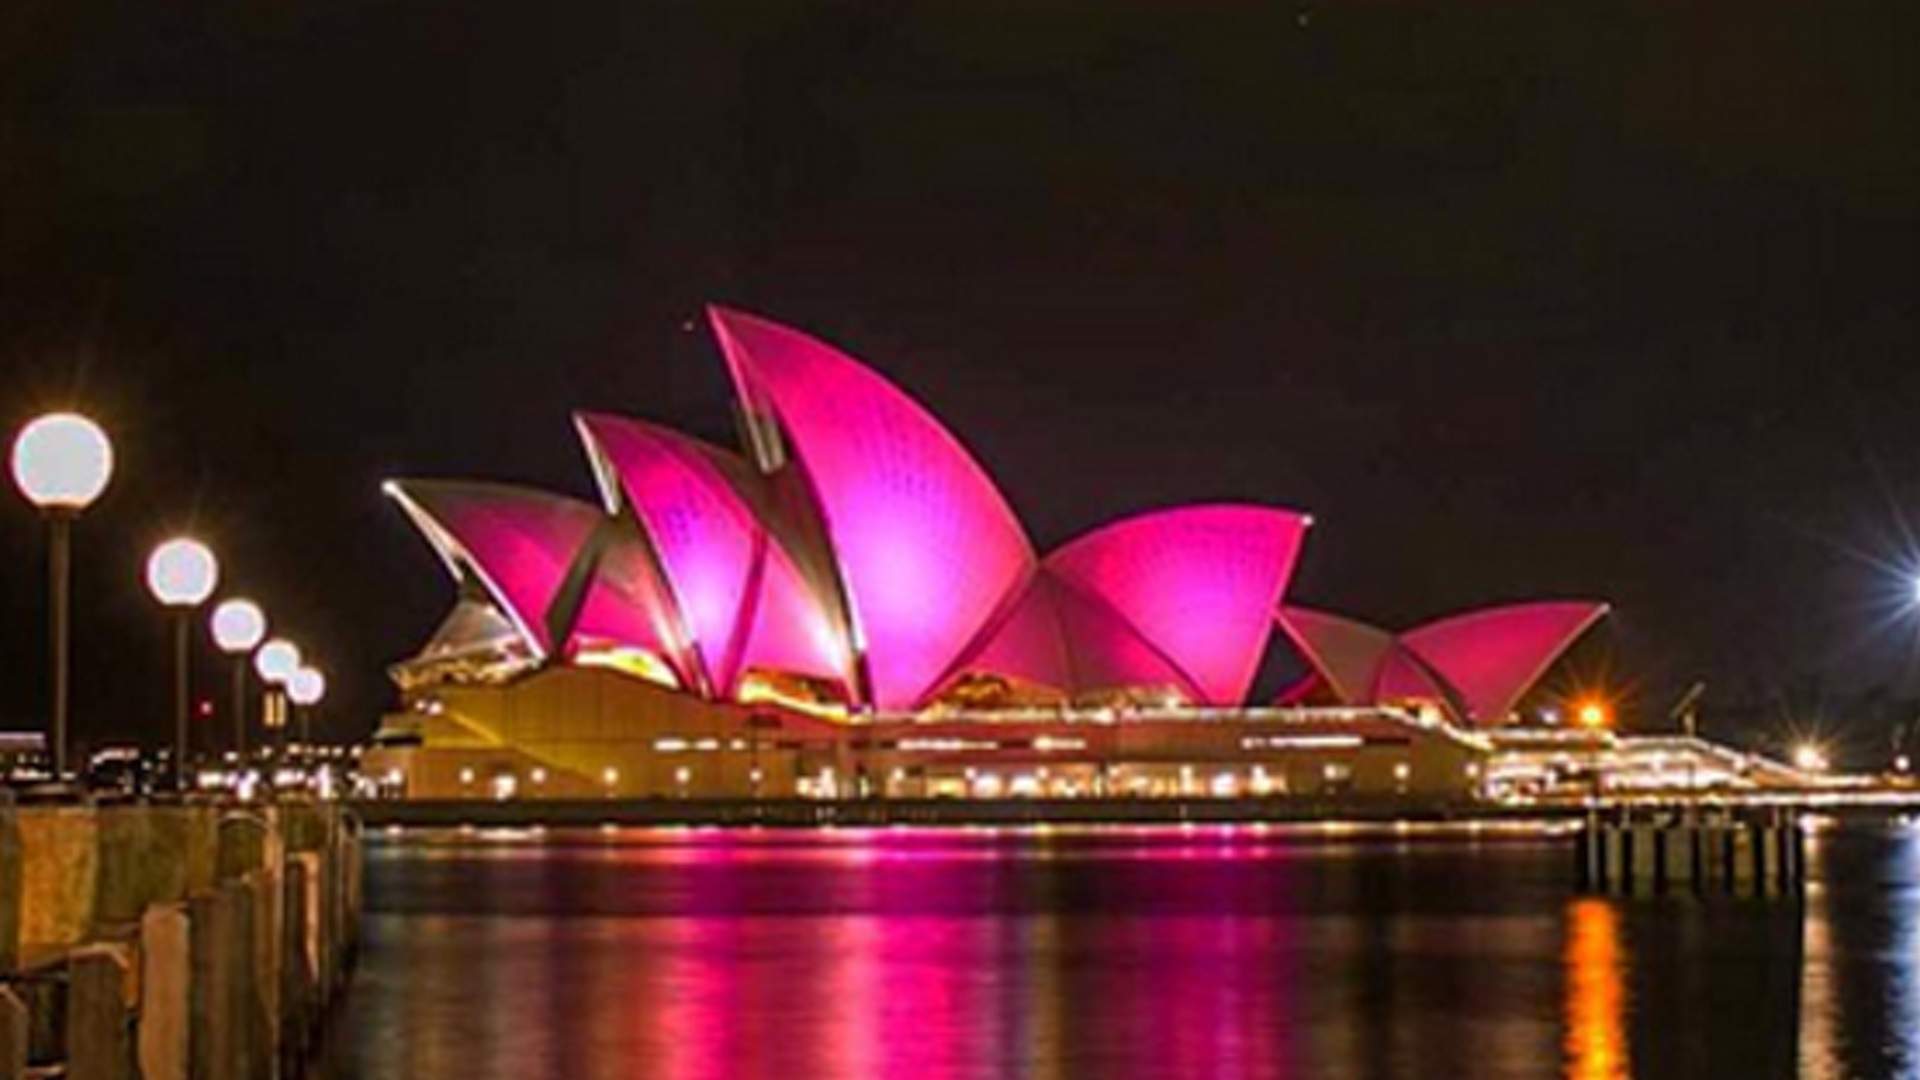 The Sails of the Sydney Opera House Will Light Up Hot Pink to Launch Mardi Gras